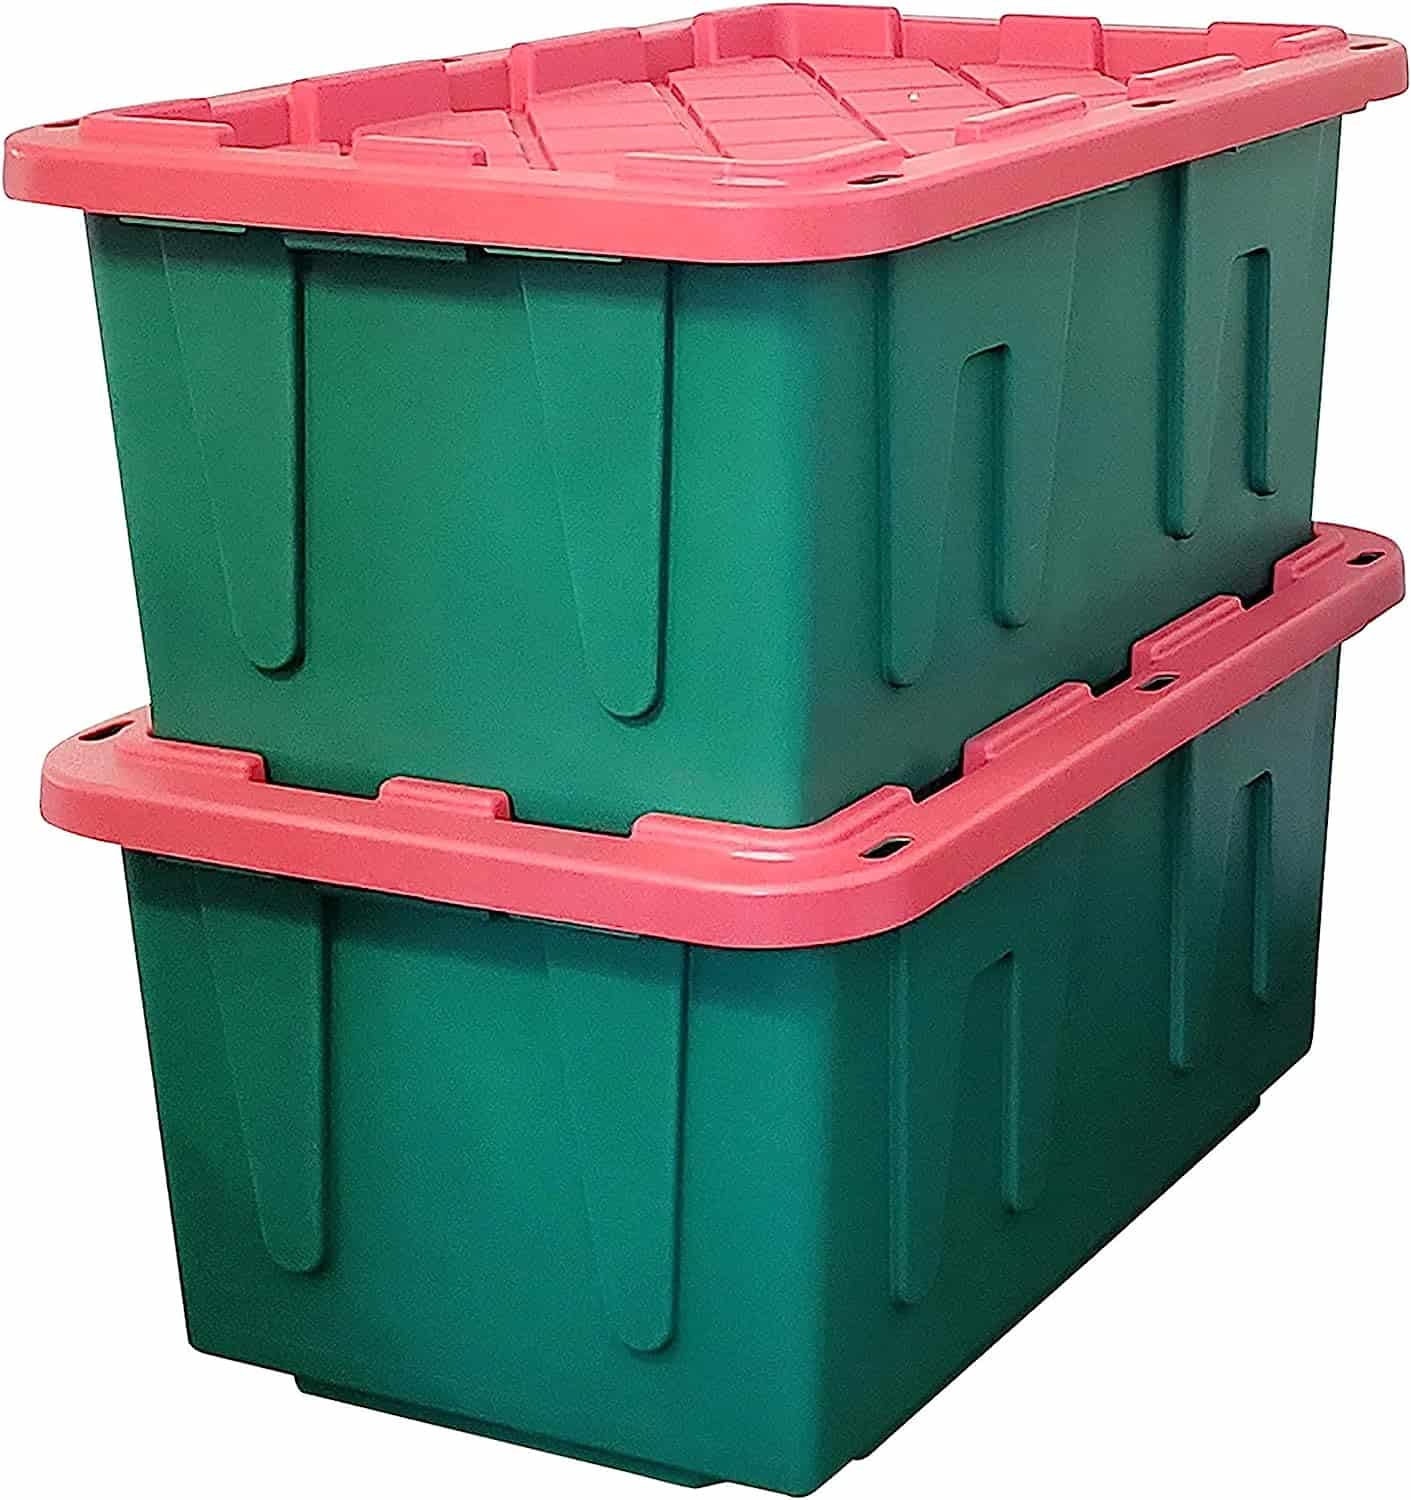 Durabilt 27 Gallon Heavy Duty Impact Resistant Stackable Holiday Storage Tote with Snap-Fit Lid, Green/Red (2 Pack)